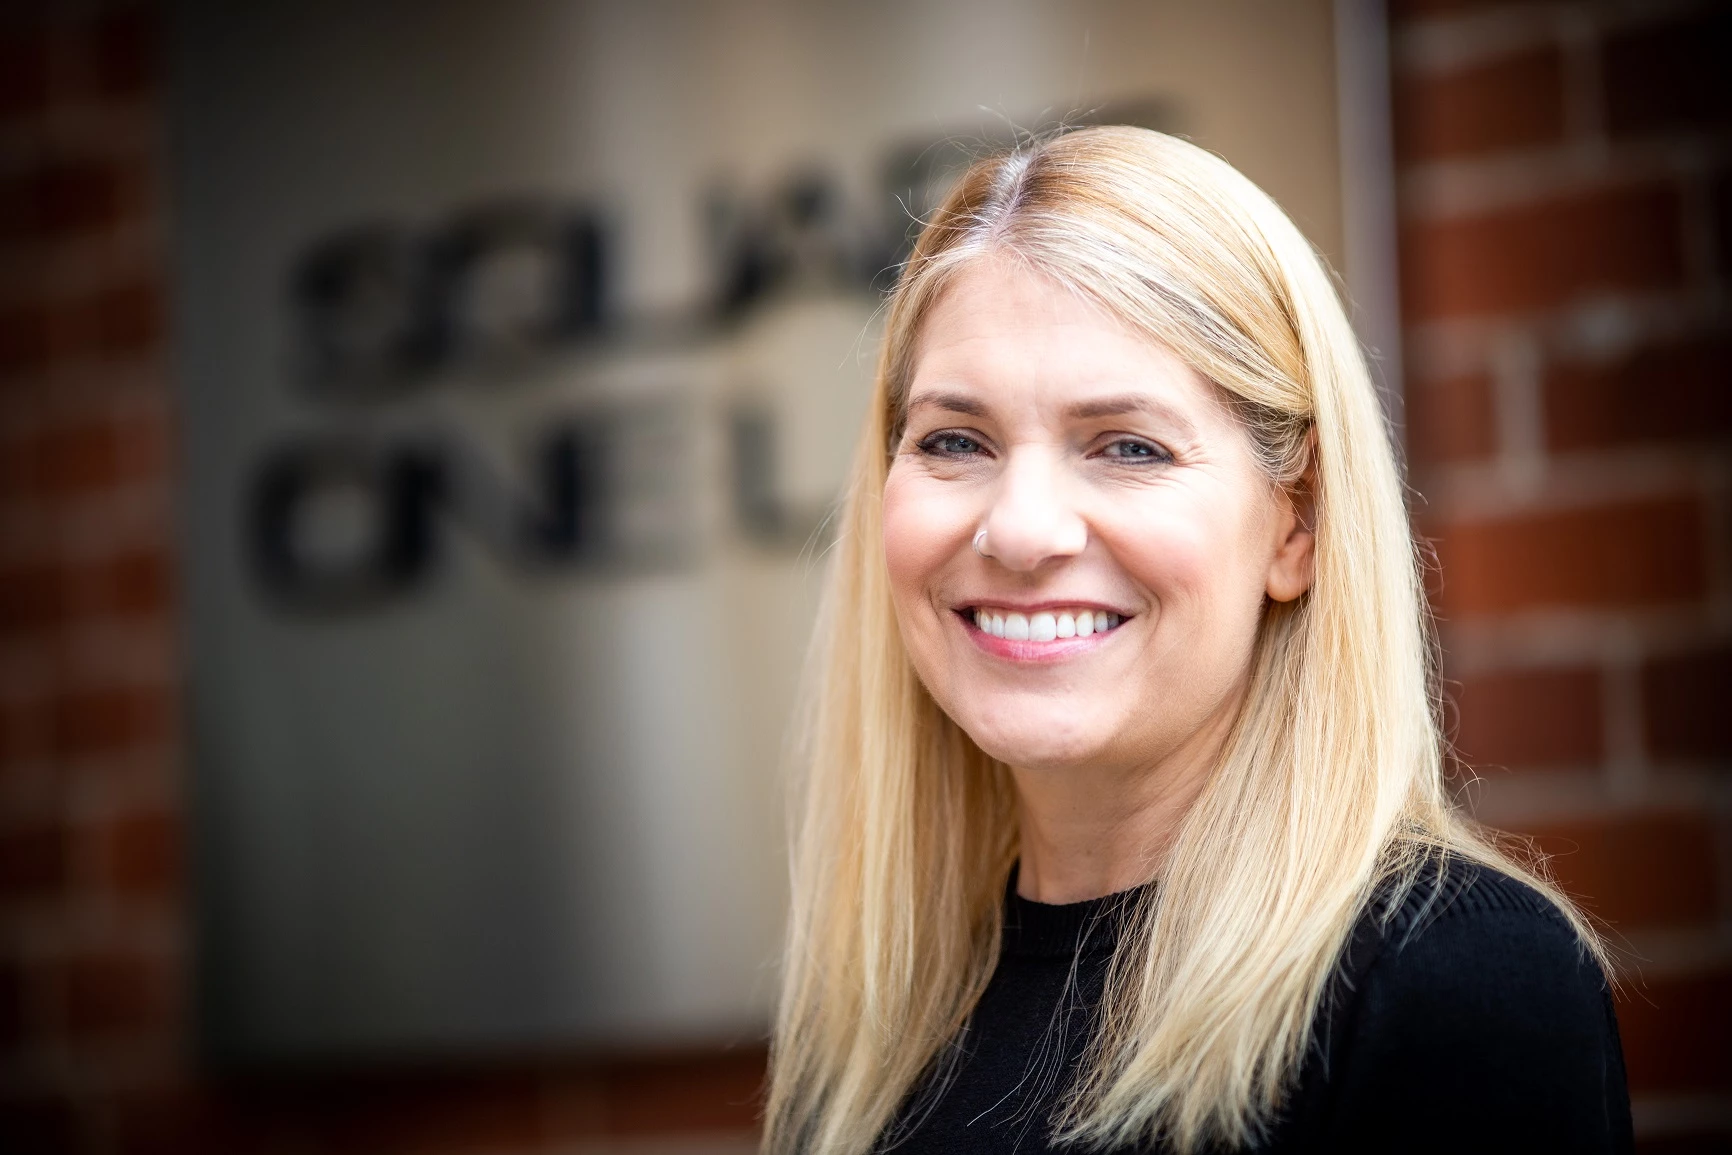 Gill Hunter, Managing Partner at Square One Law